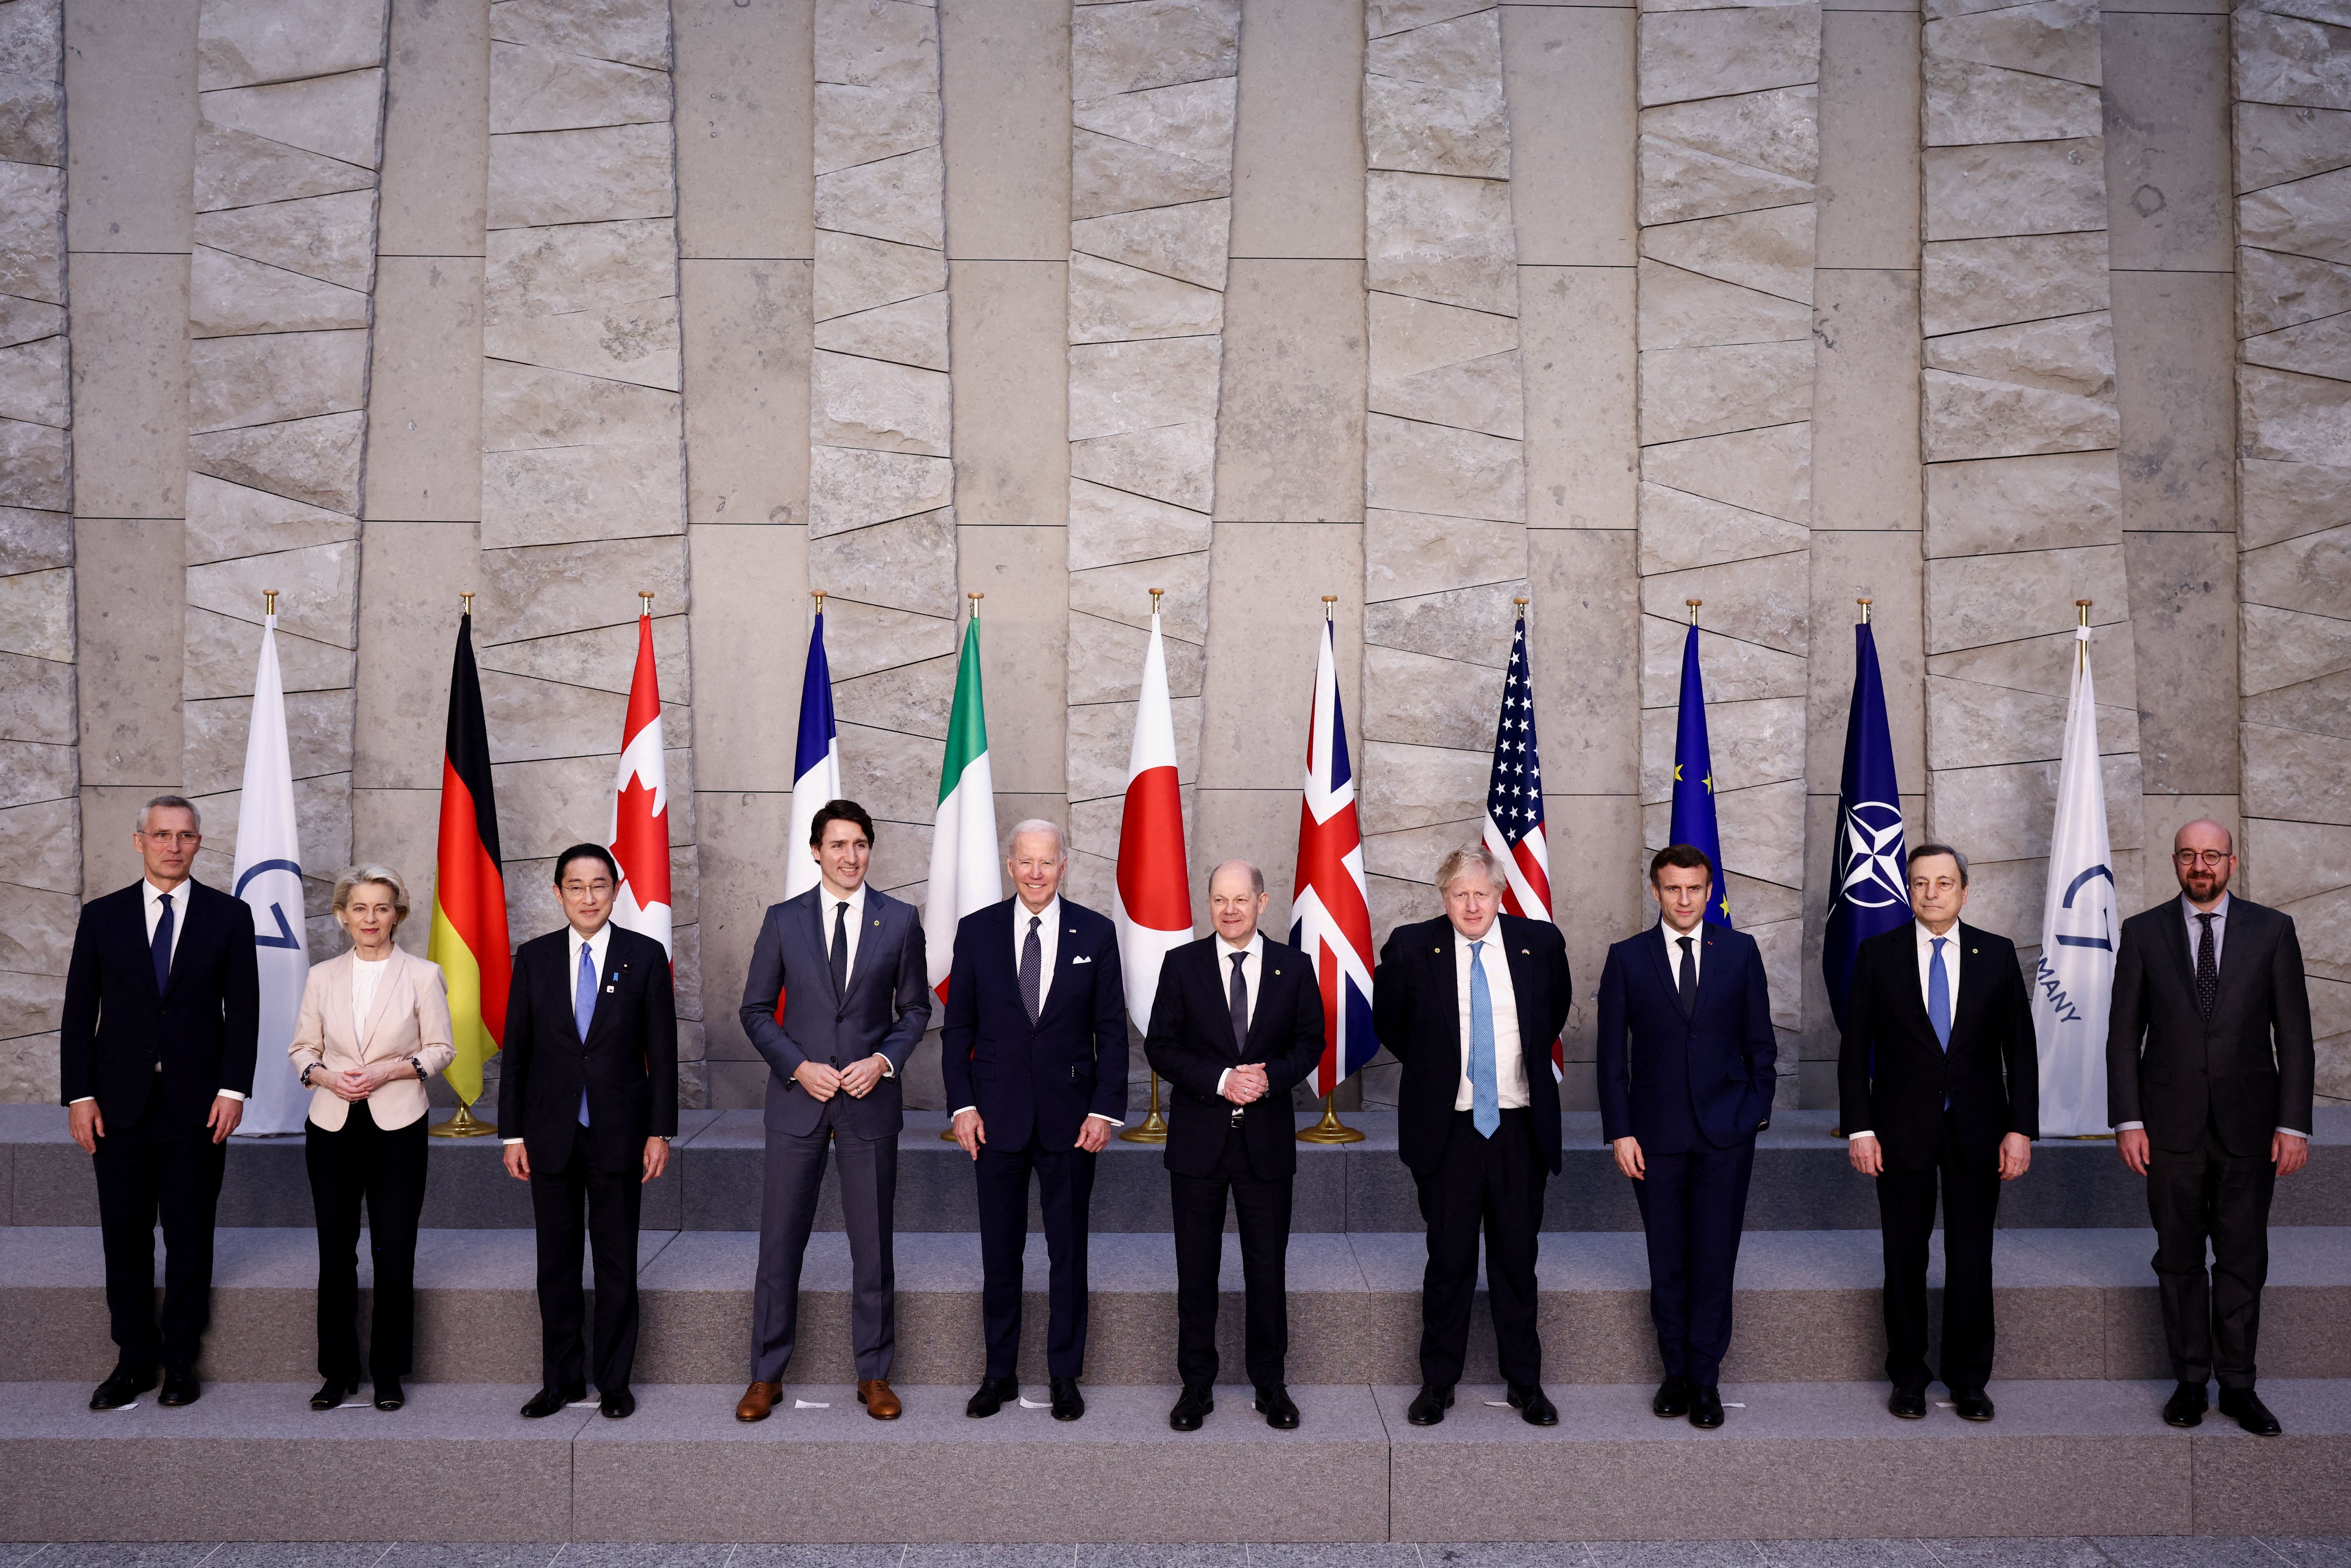 Left to right: NATO Secretary General Jens Stoltenberg, European Commission President Ursula von der Leyen, Japan's Prime Minister Fumio Kishida, Canada's Prime Minister Justin Trudeau, U.S. President Joe Biden, Germany's Chancellor Olaf Scholz, British Prime Minister Boris Johnson, France's President Emmanuel Macron, Italy's Prime Minister Mario Draghi and European Council President Charles Michel pose for a G7 leaders' family photograph during a NATO summit at the alliance's headquarters in Brussels, Belgium, on March 24. 